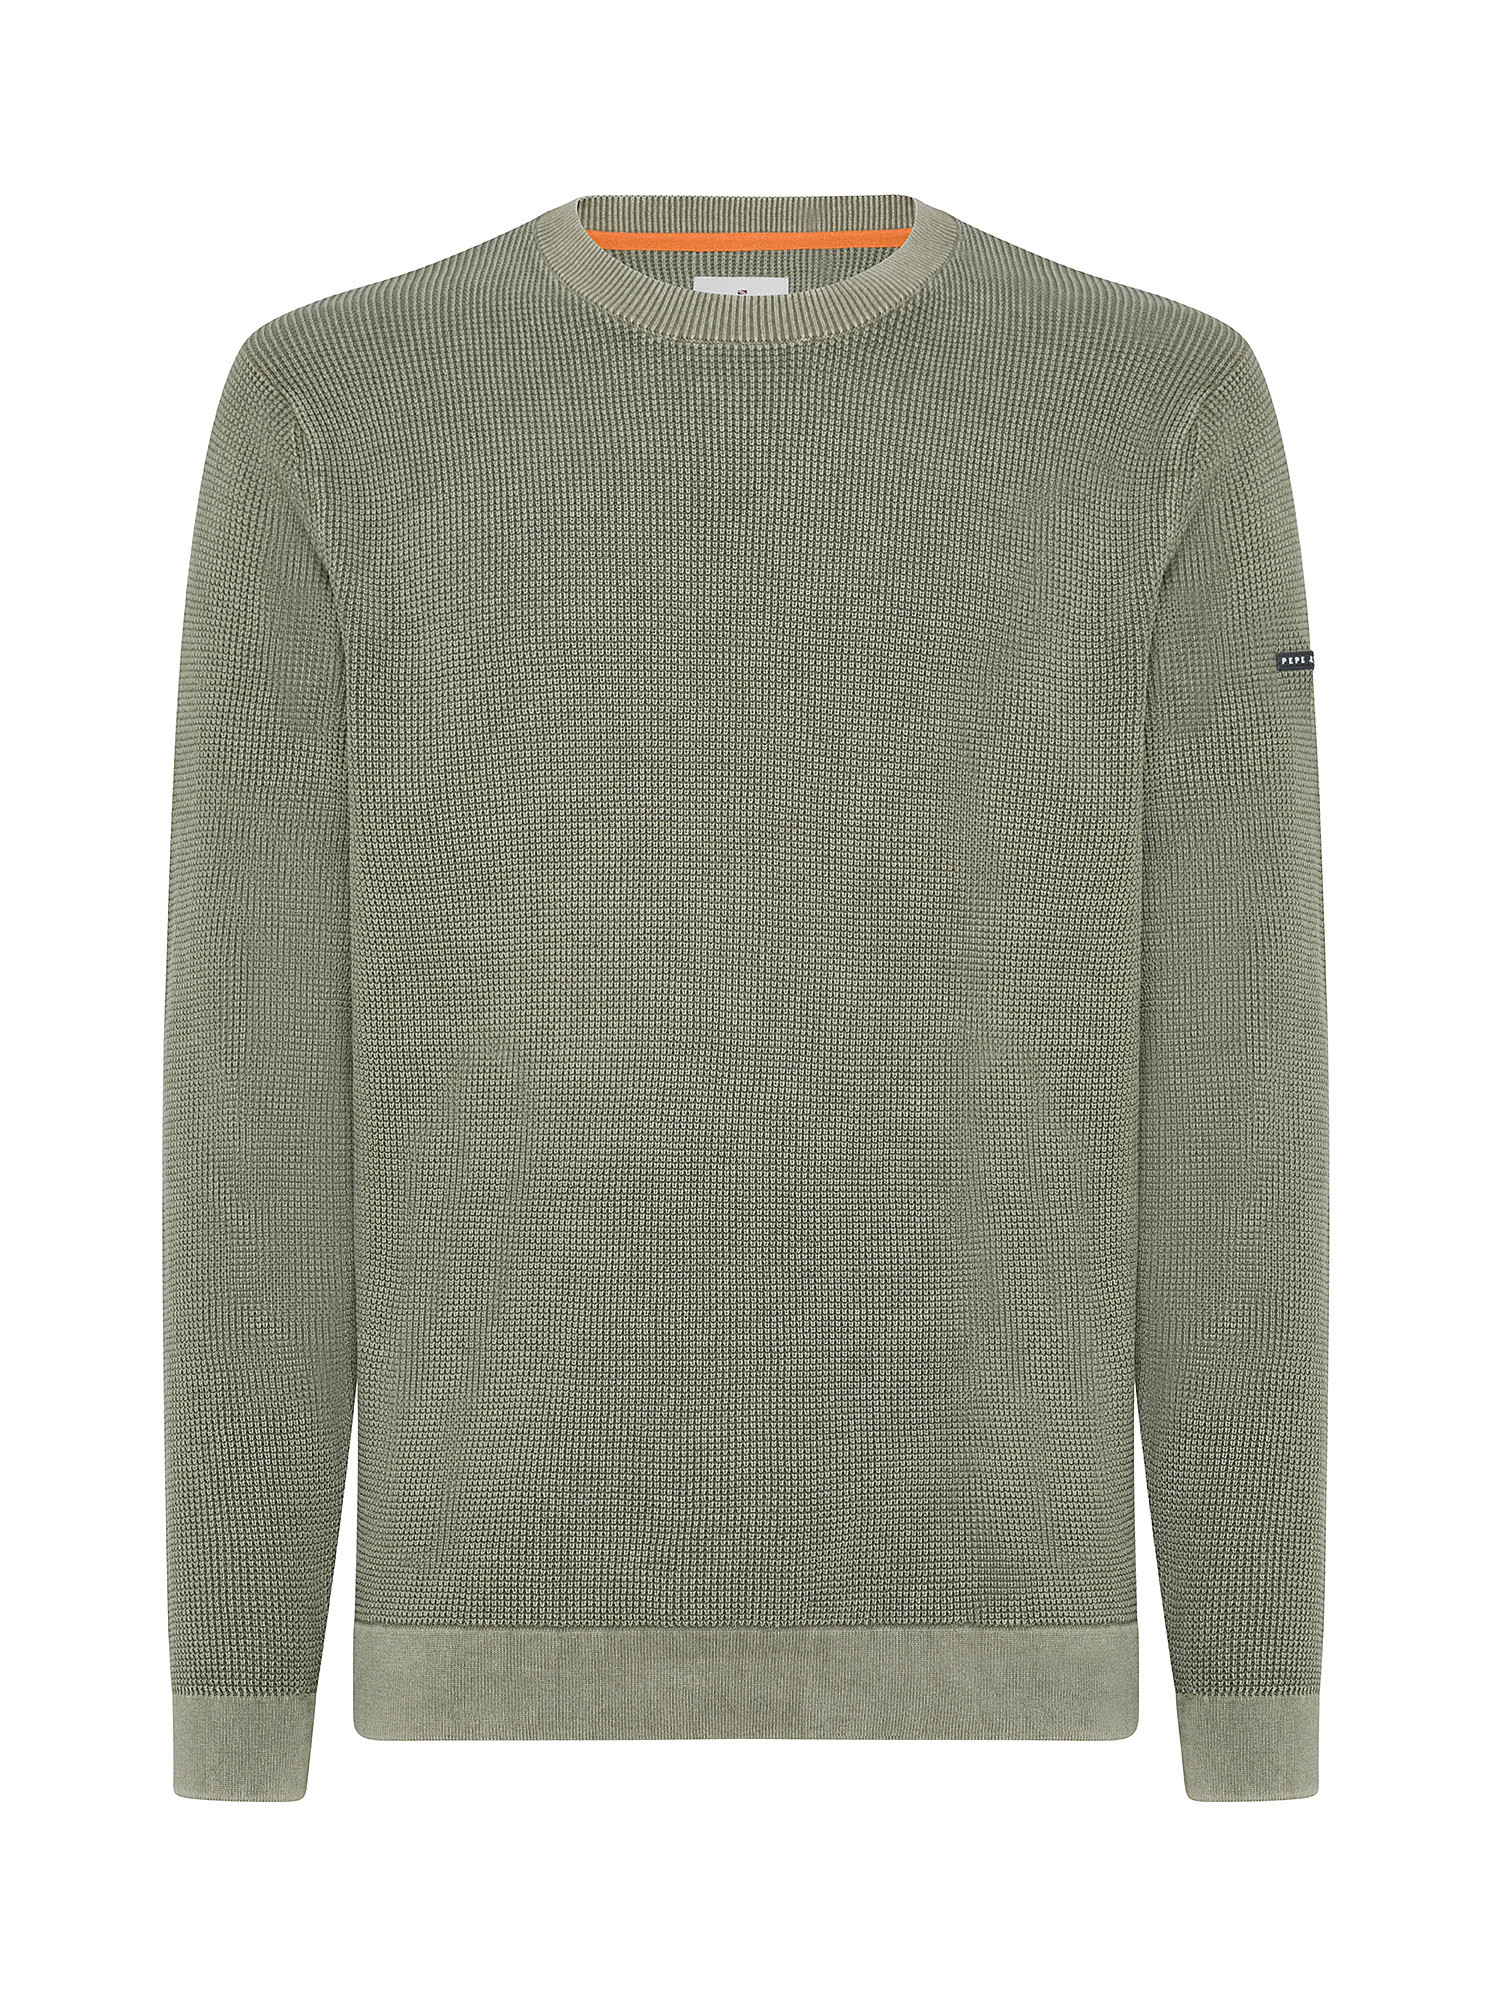 Pepe Jeans - Honeycomb sweater, Light Green, large image number 0